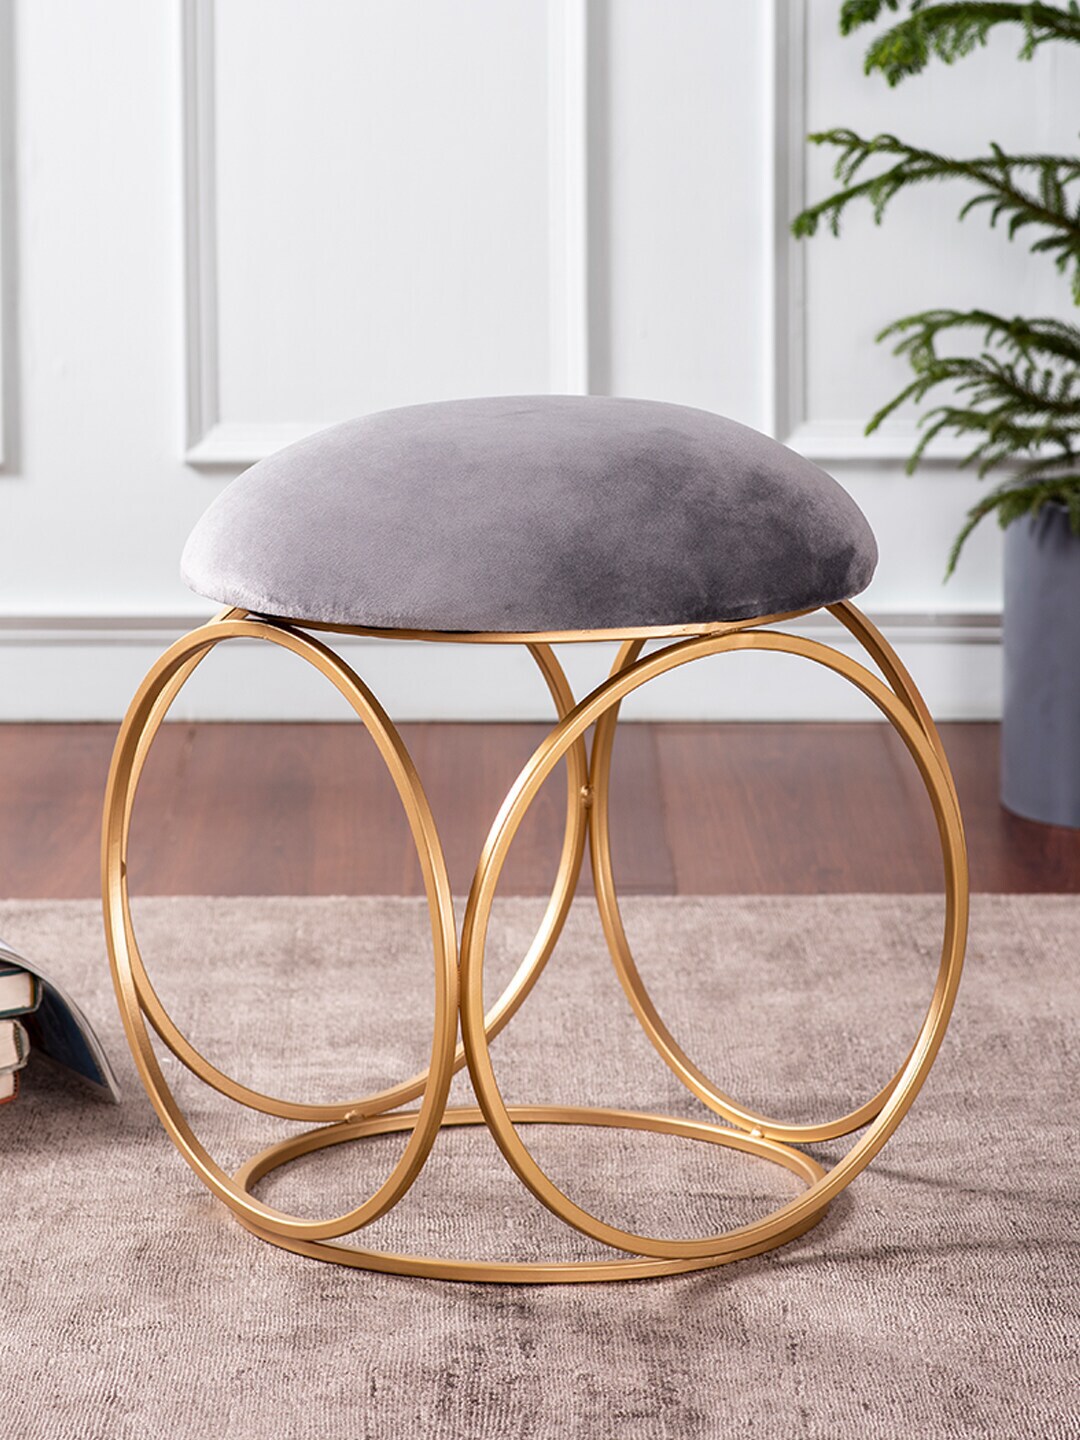 nestroots Grey & Gold Toned Metal Round Ottomans Price in India